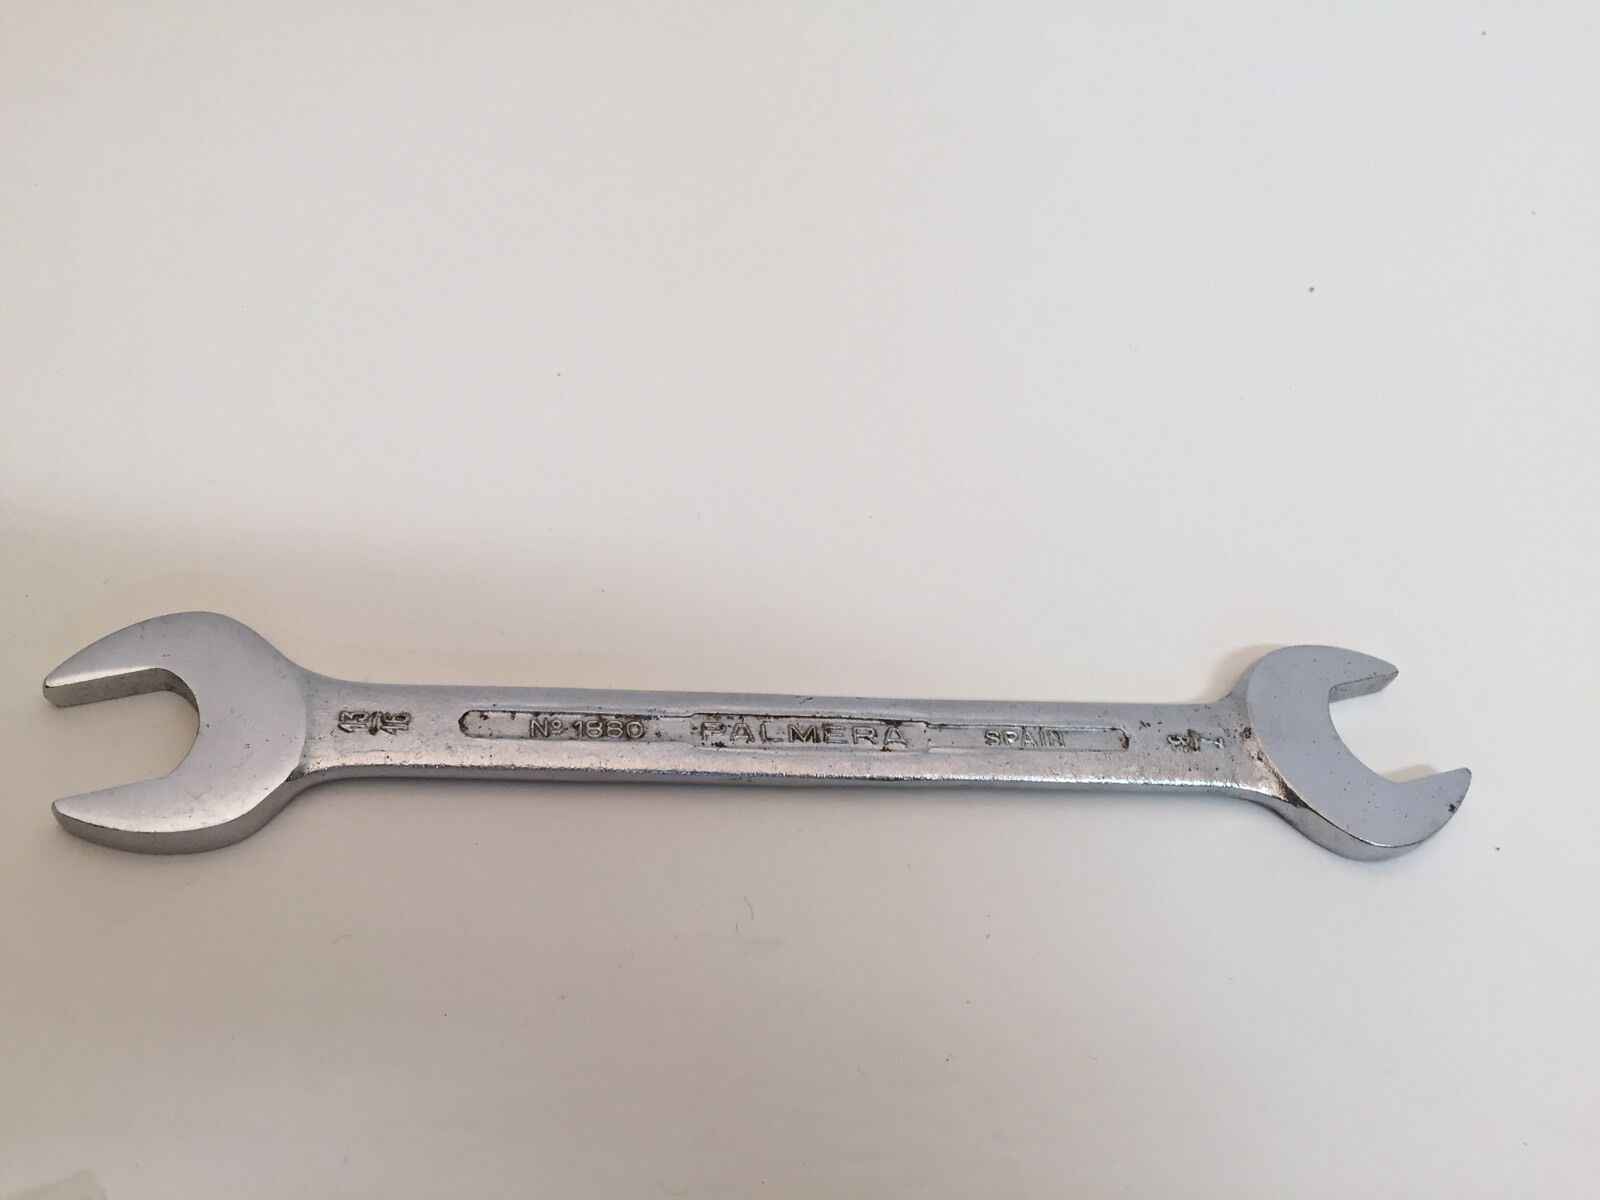 Palmera chrome vanadium 1880 13/16 by 7/8 open end wrench. Made in Spain